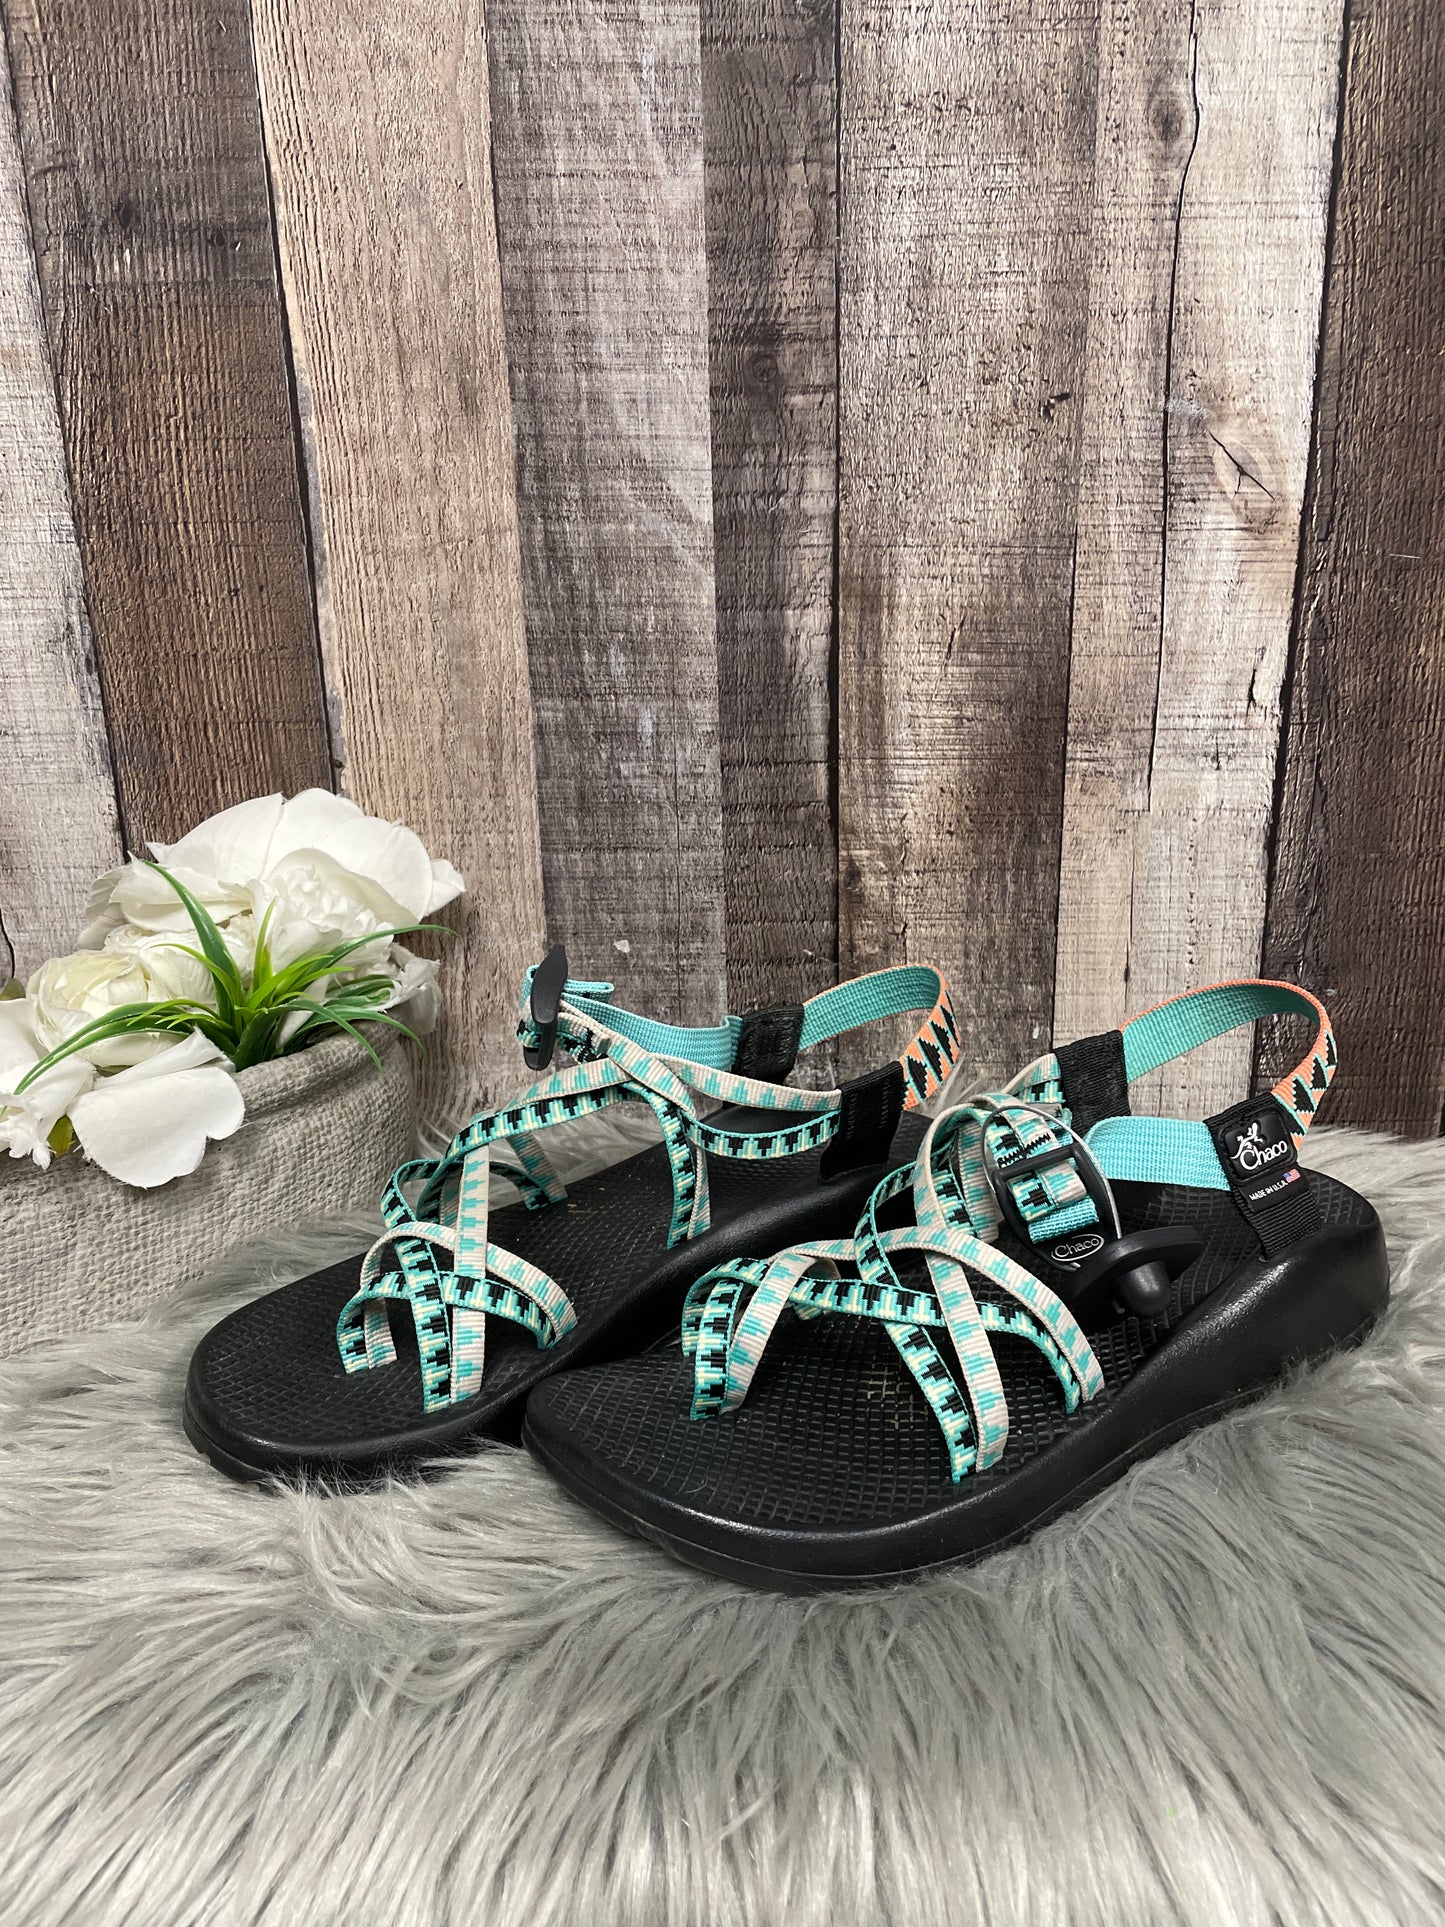 Sandals Flats By Chacos  Size: 11